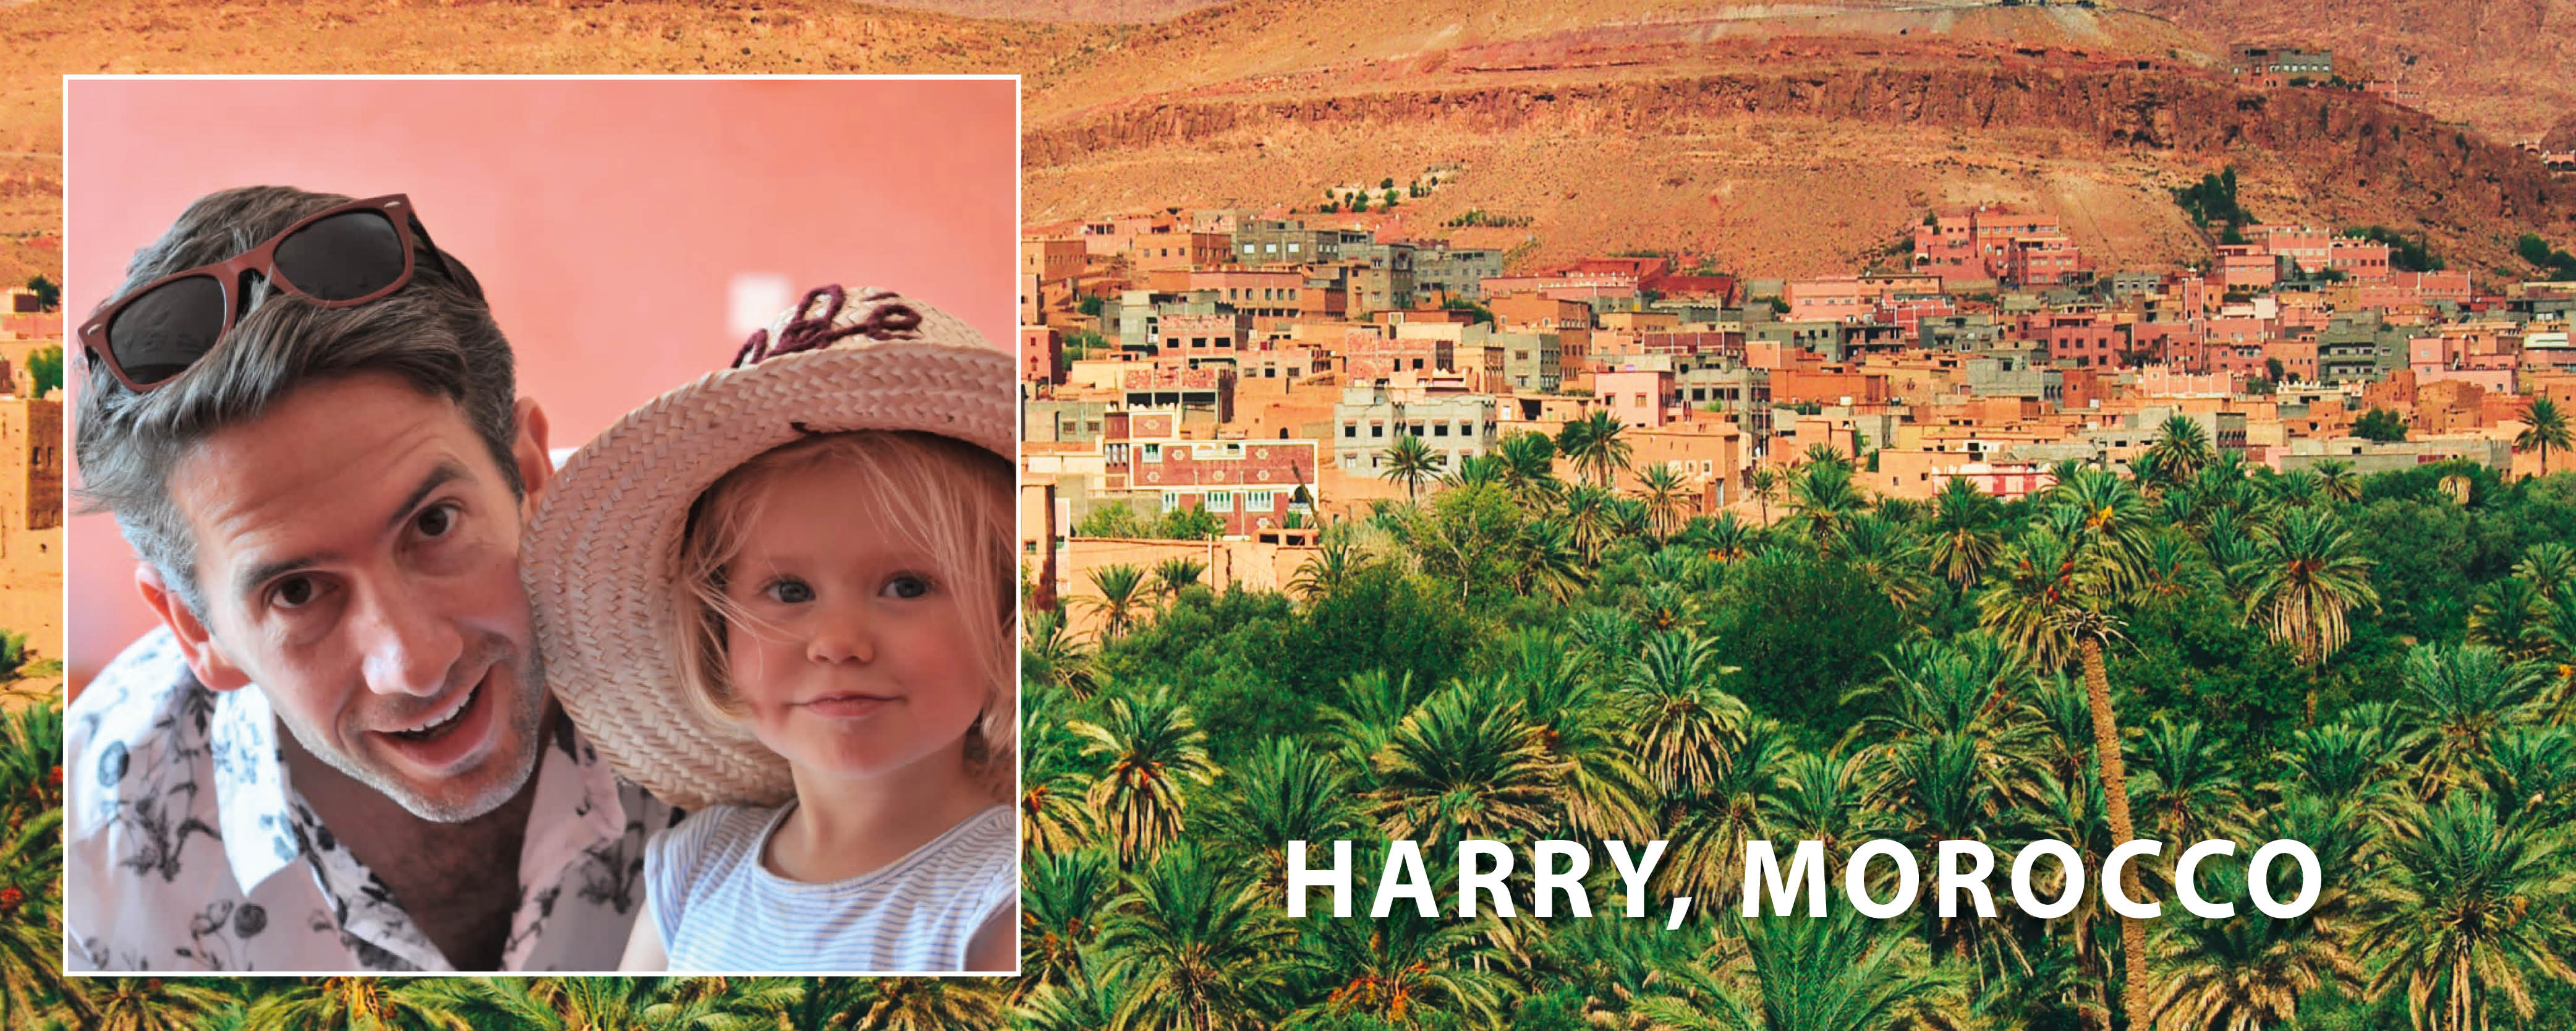 Harry and kindness in Morocco